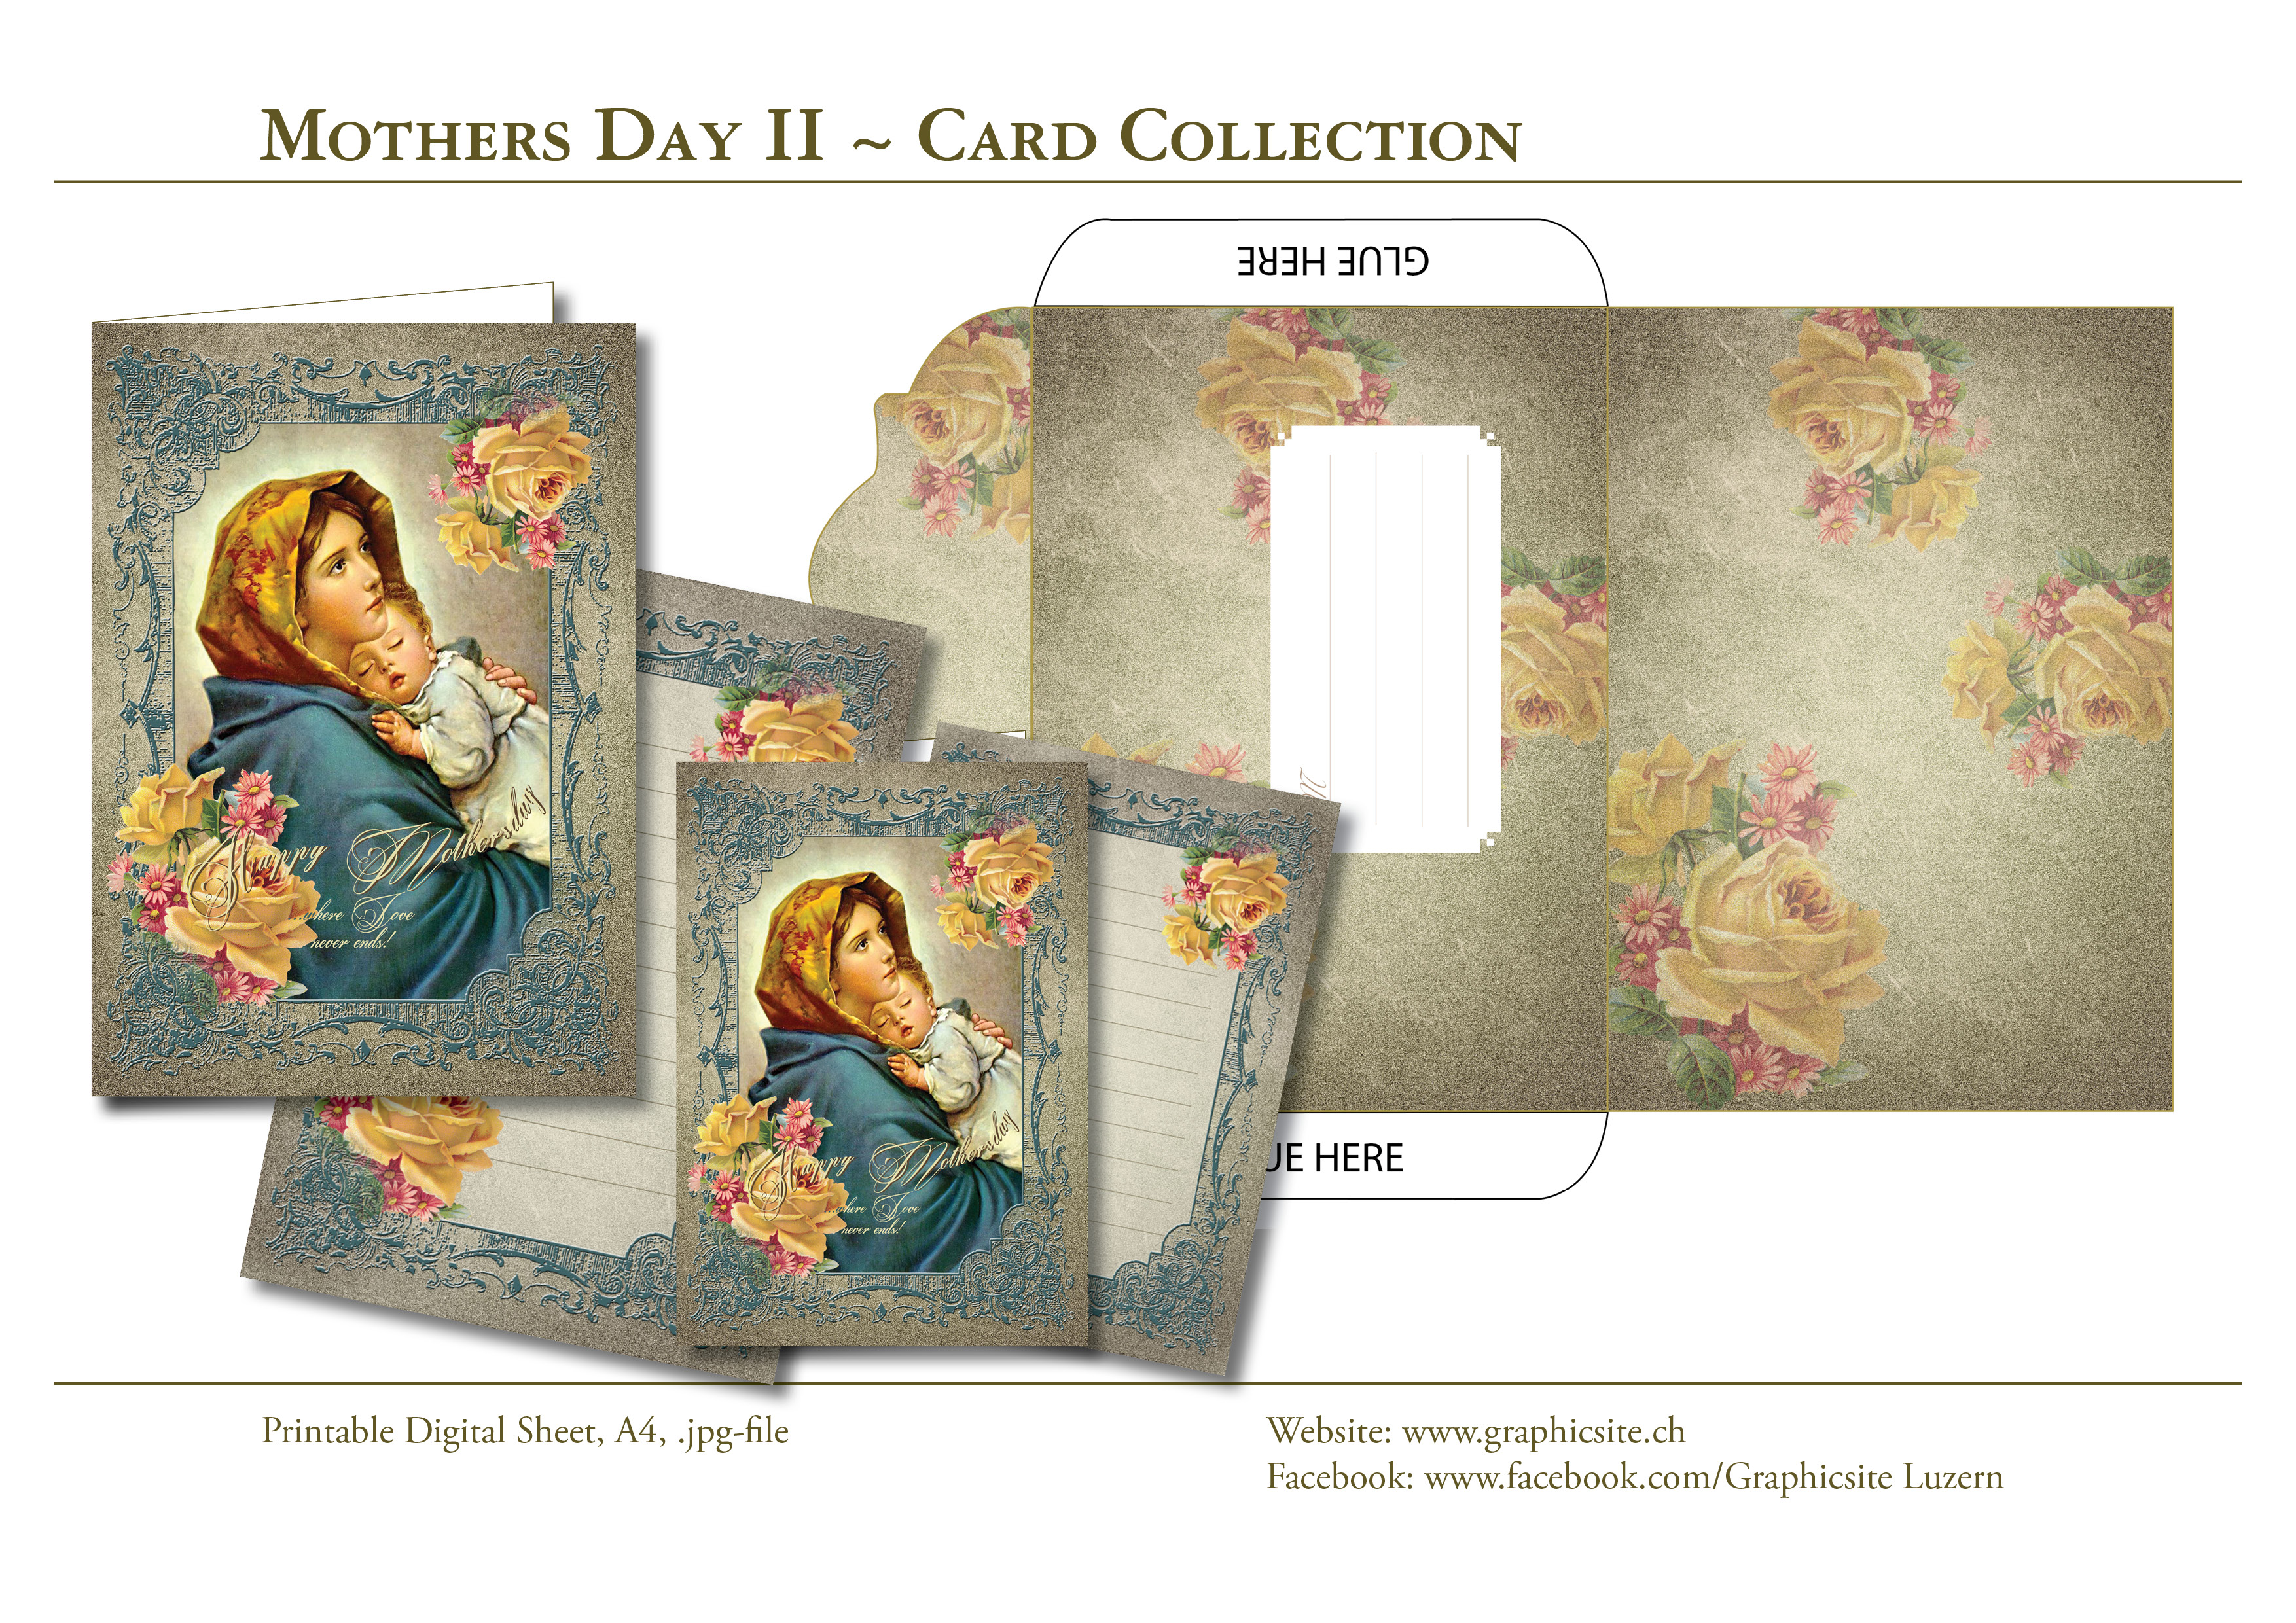 Printable Digital Sheets - Mothersday2 - Card Collection - #mothersday, #mother, #mom, #greetingcards, #graphicdesign, #luzern, #schweiz